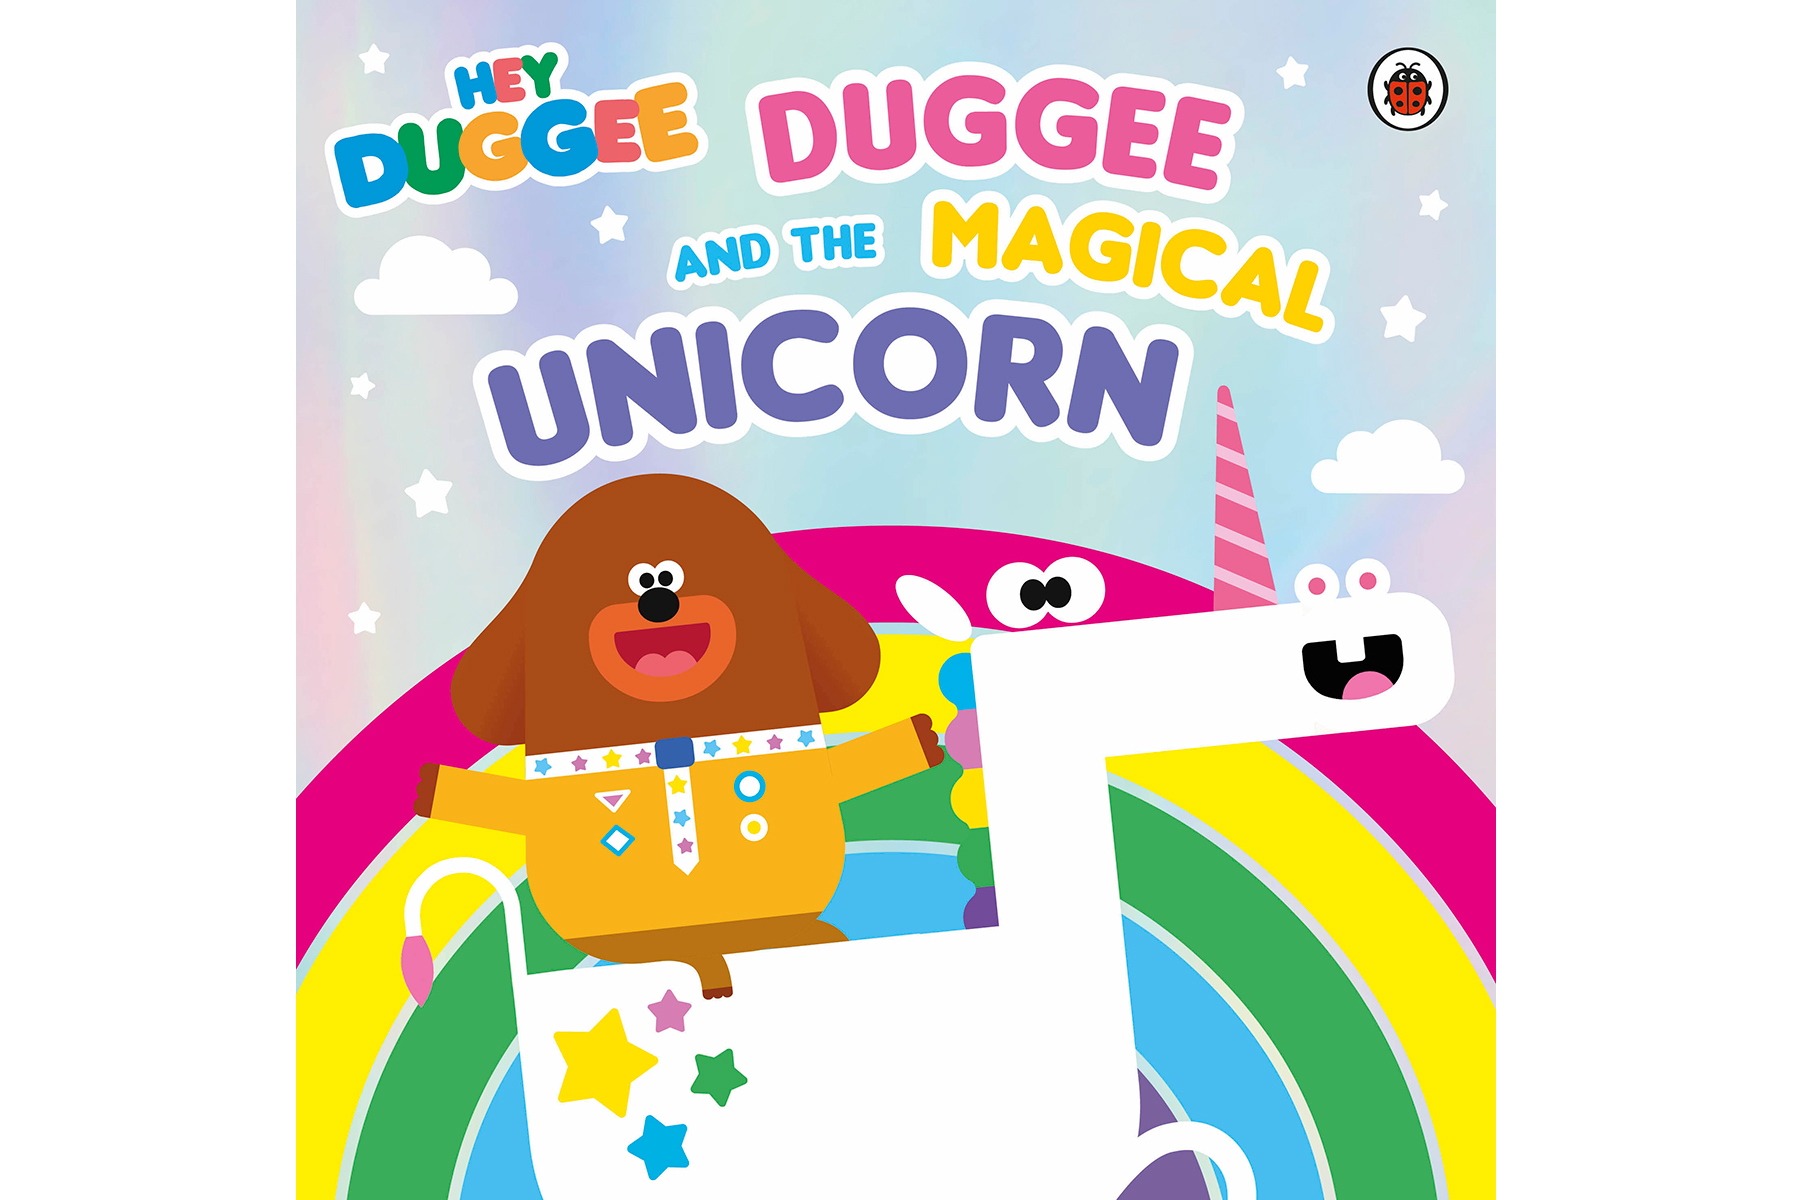 A photo of the book Hey Duggee: Duggee and the Magical Unicorn